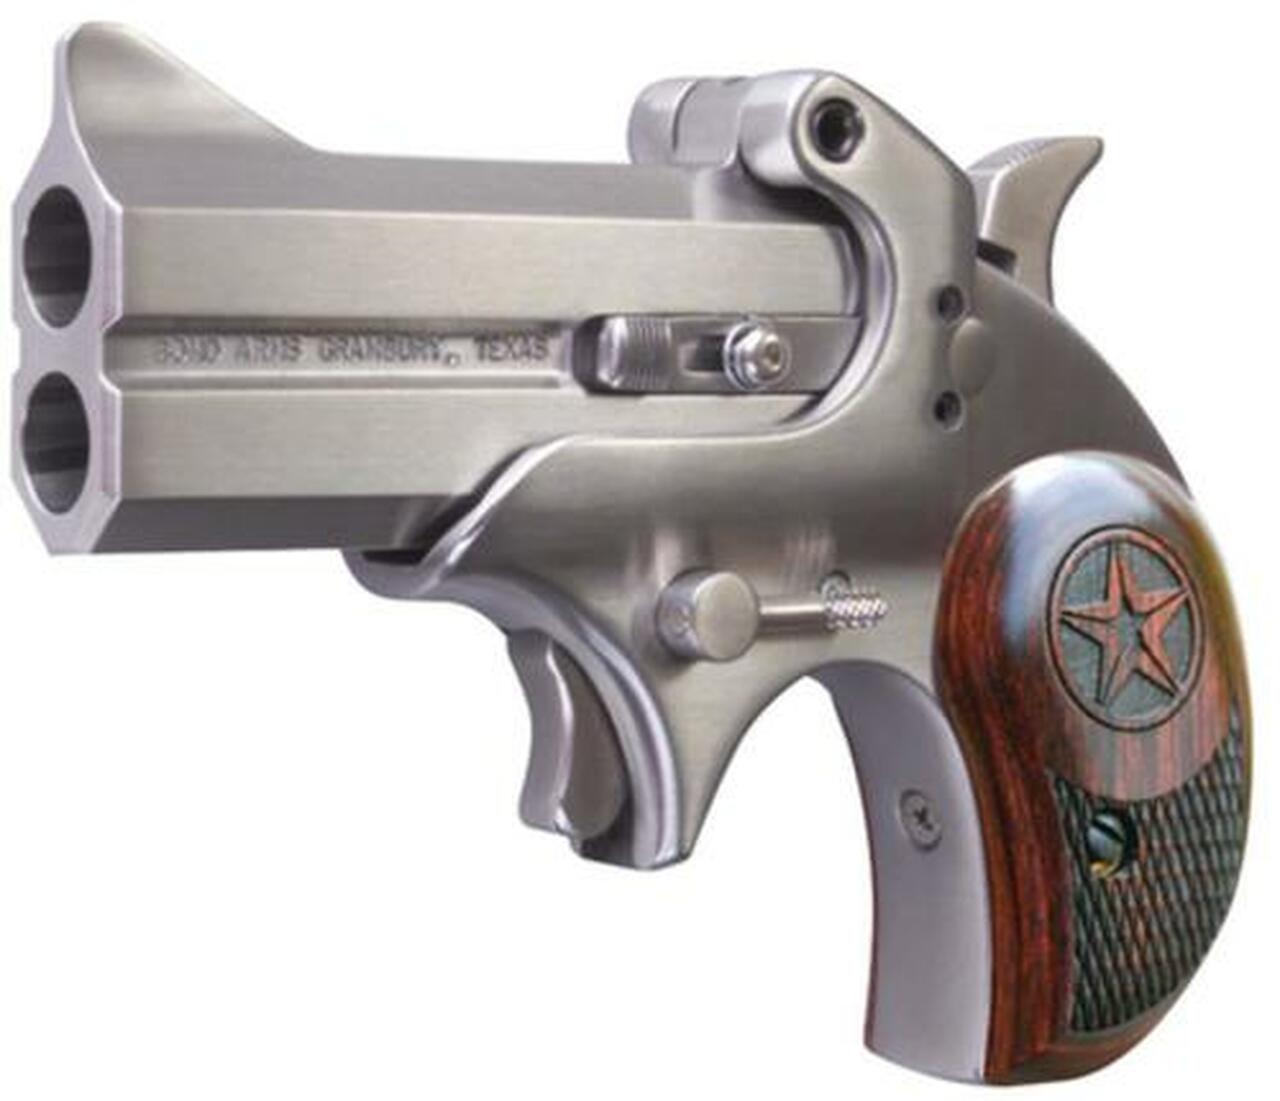 Image of Bond Arms Cowboy Defender 45 ACP 3" Barrel Polished Stainless Steel Finish